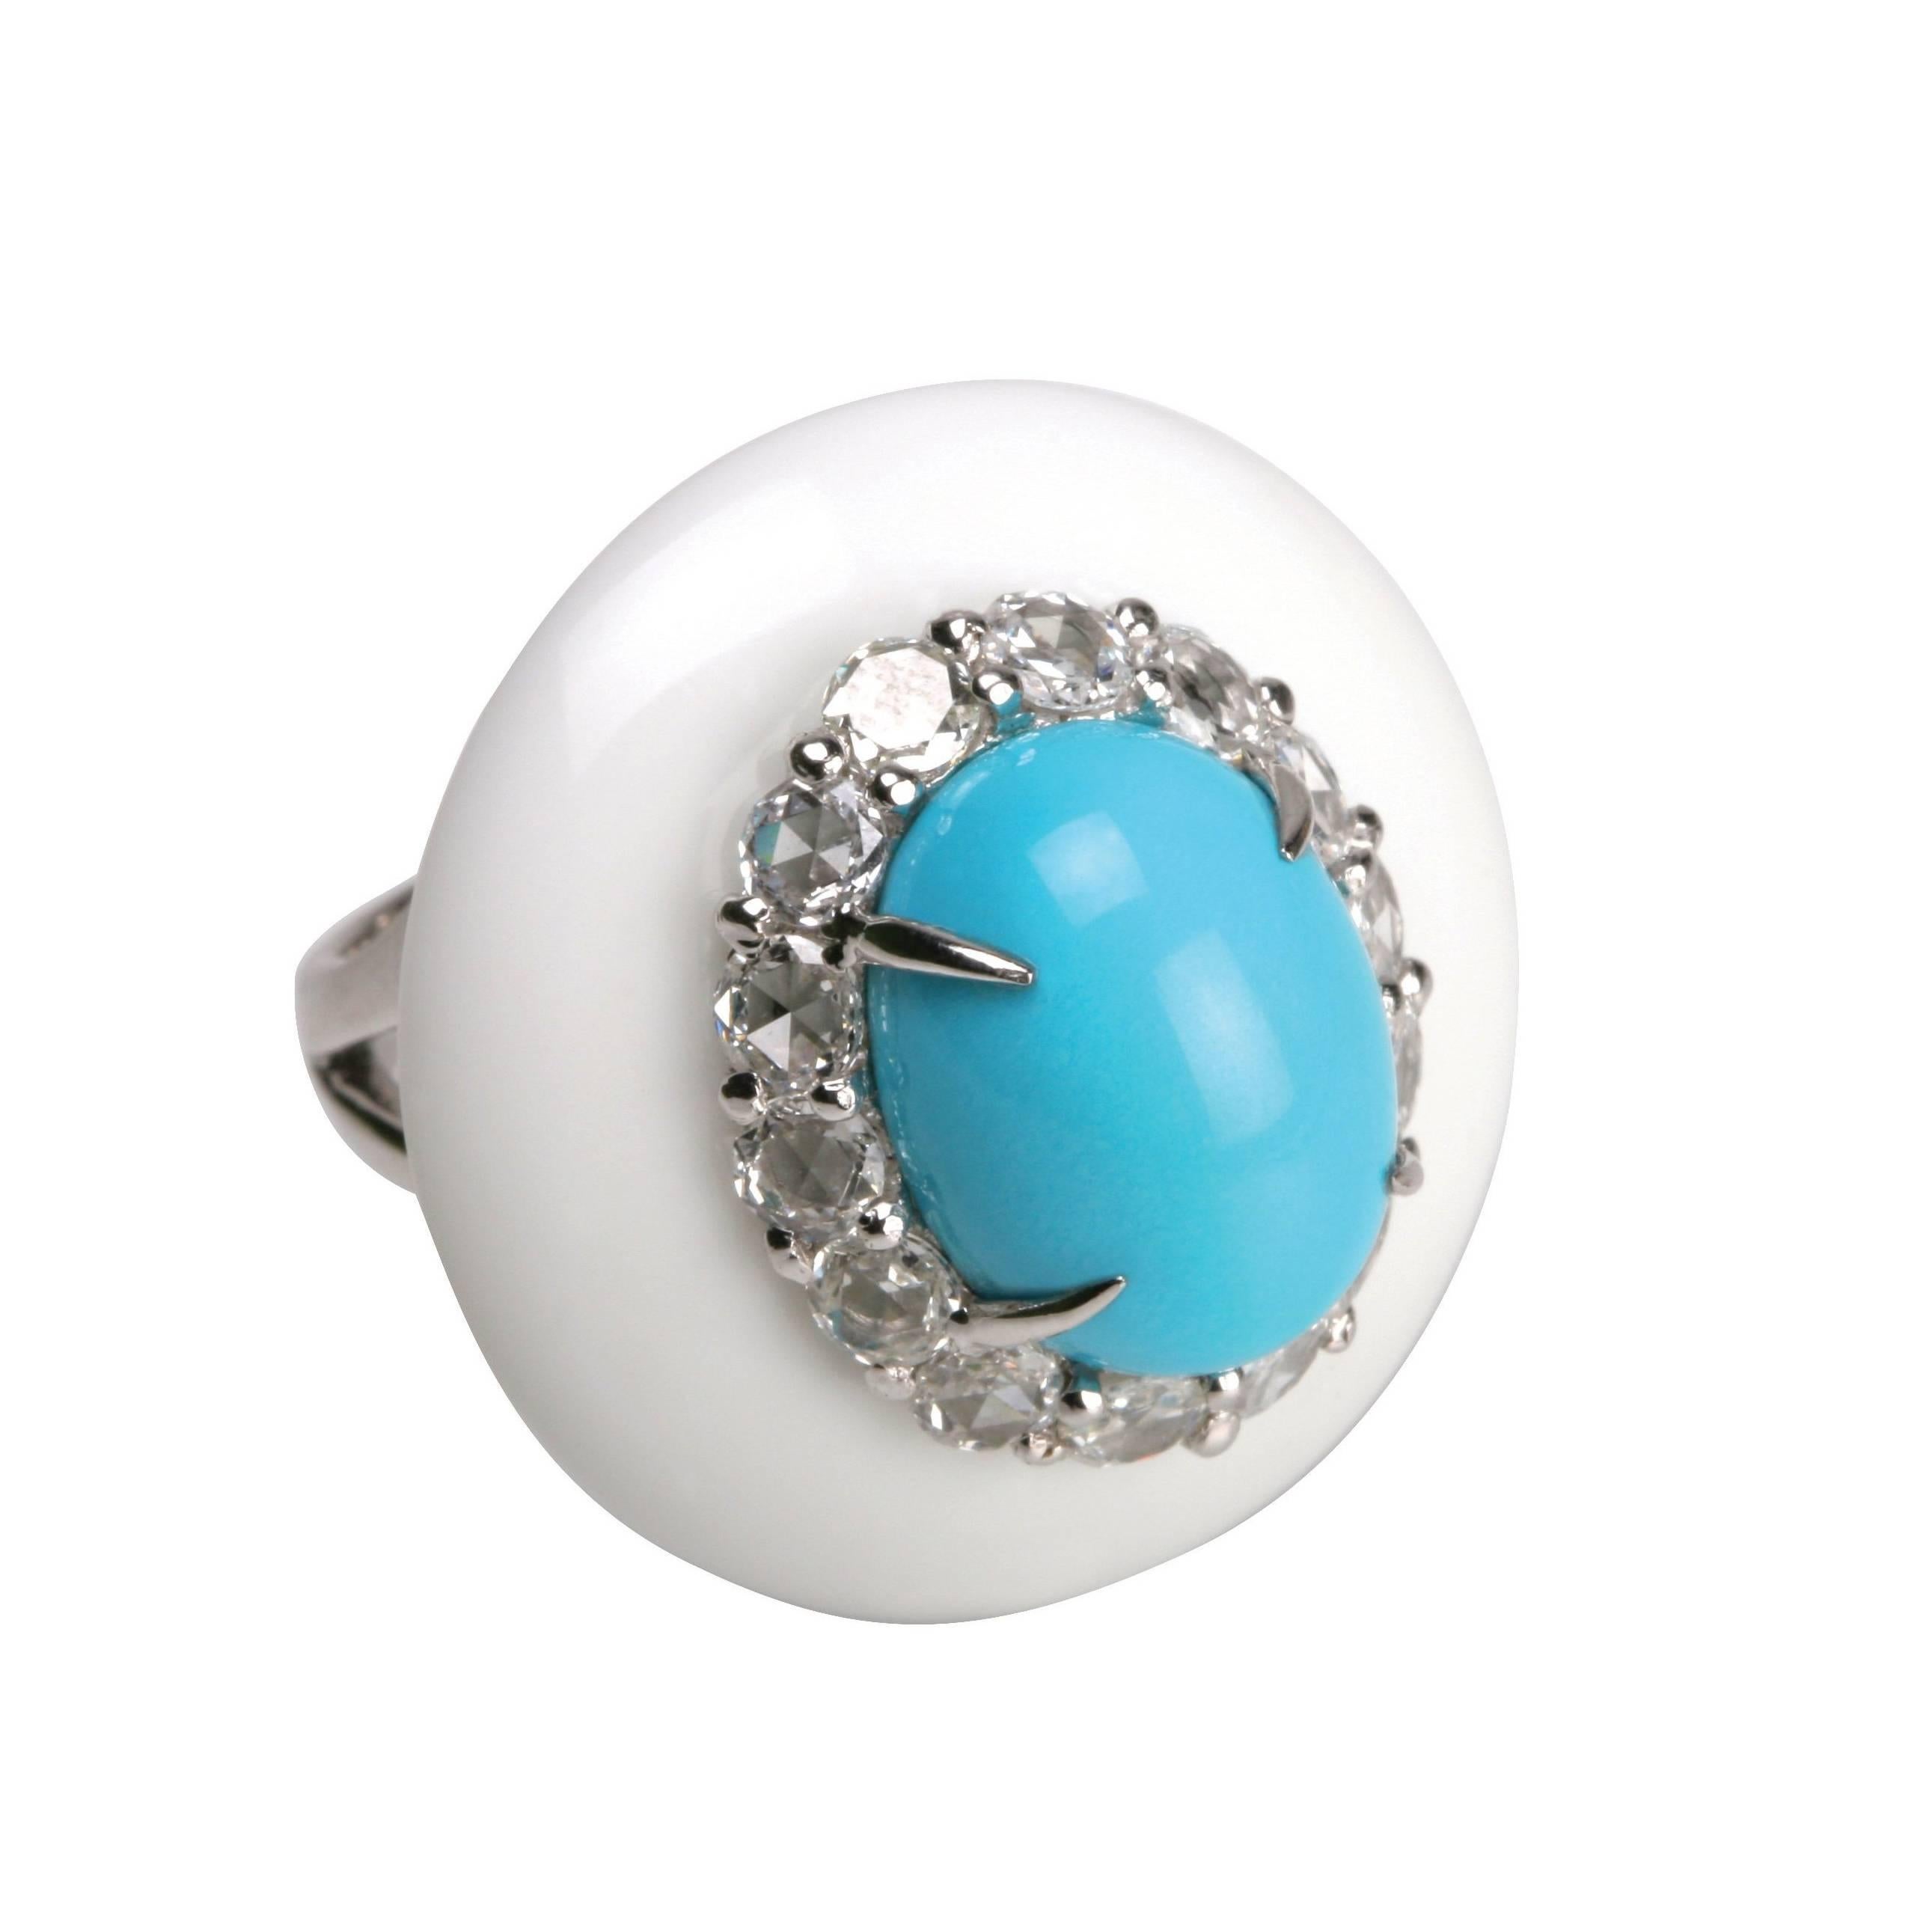 Metal: 18K White Gold
Ring Precious Stones: Agate, Turquoise, Diamonds (1.6ct, 14 pieces)
Ring Size: Standard US Ring Size 6
Earrings Precious Stones: Turquoise, Diamonds (3.6ct, 28 pieces)
Please allow for slight variations in measurements as